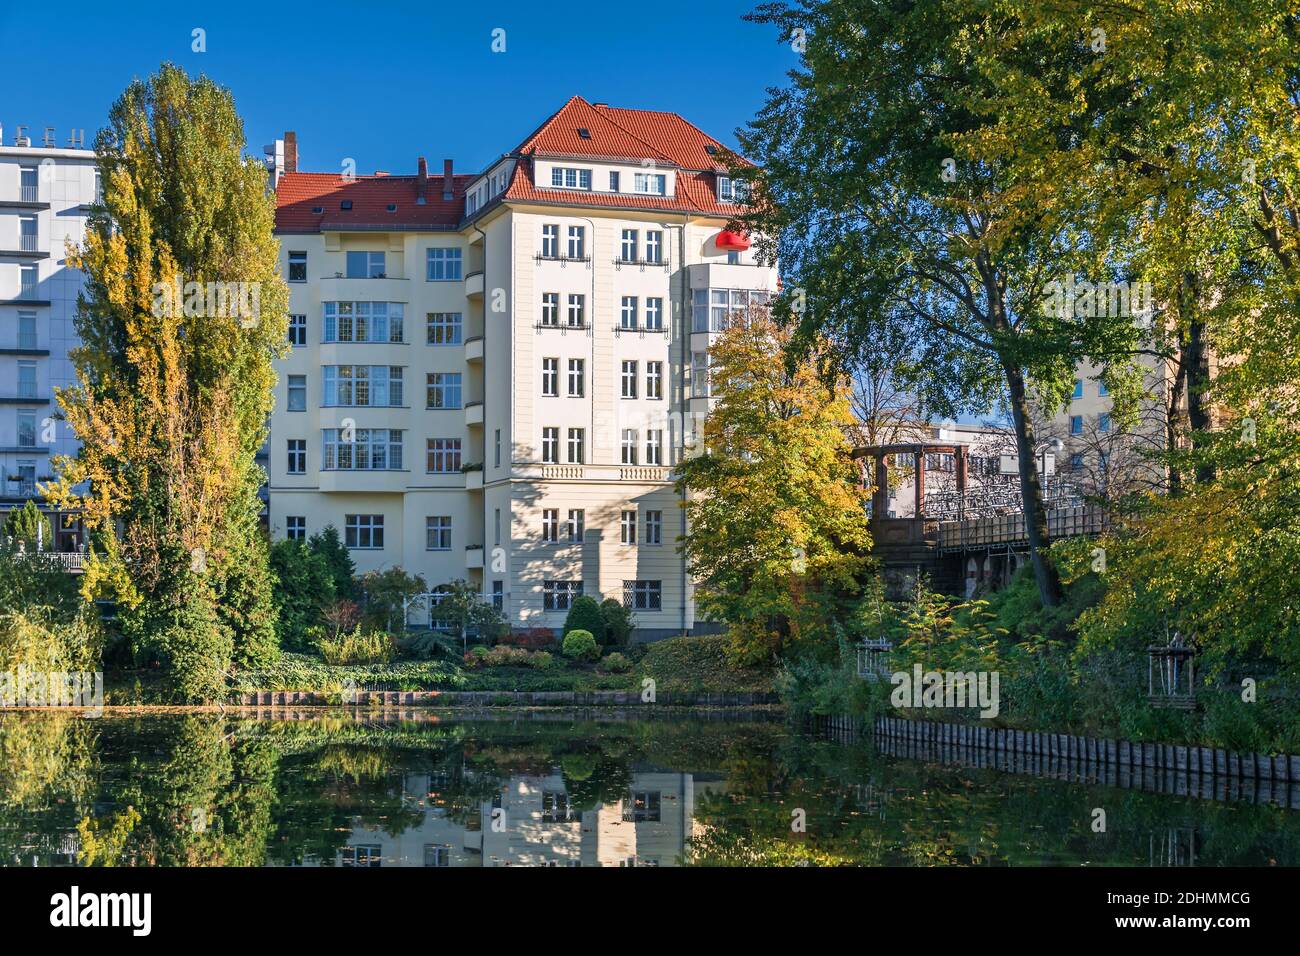 Berlin, Germany - November 7, 2020: Building of Head office of Ziegler Film, independent film and TV production company and the Lake Lietzen bridge ov Stock Photo